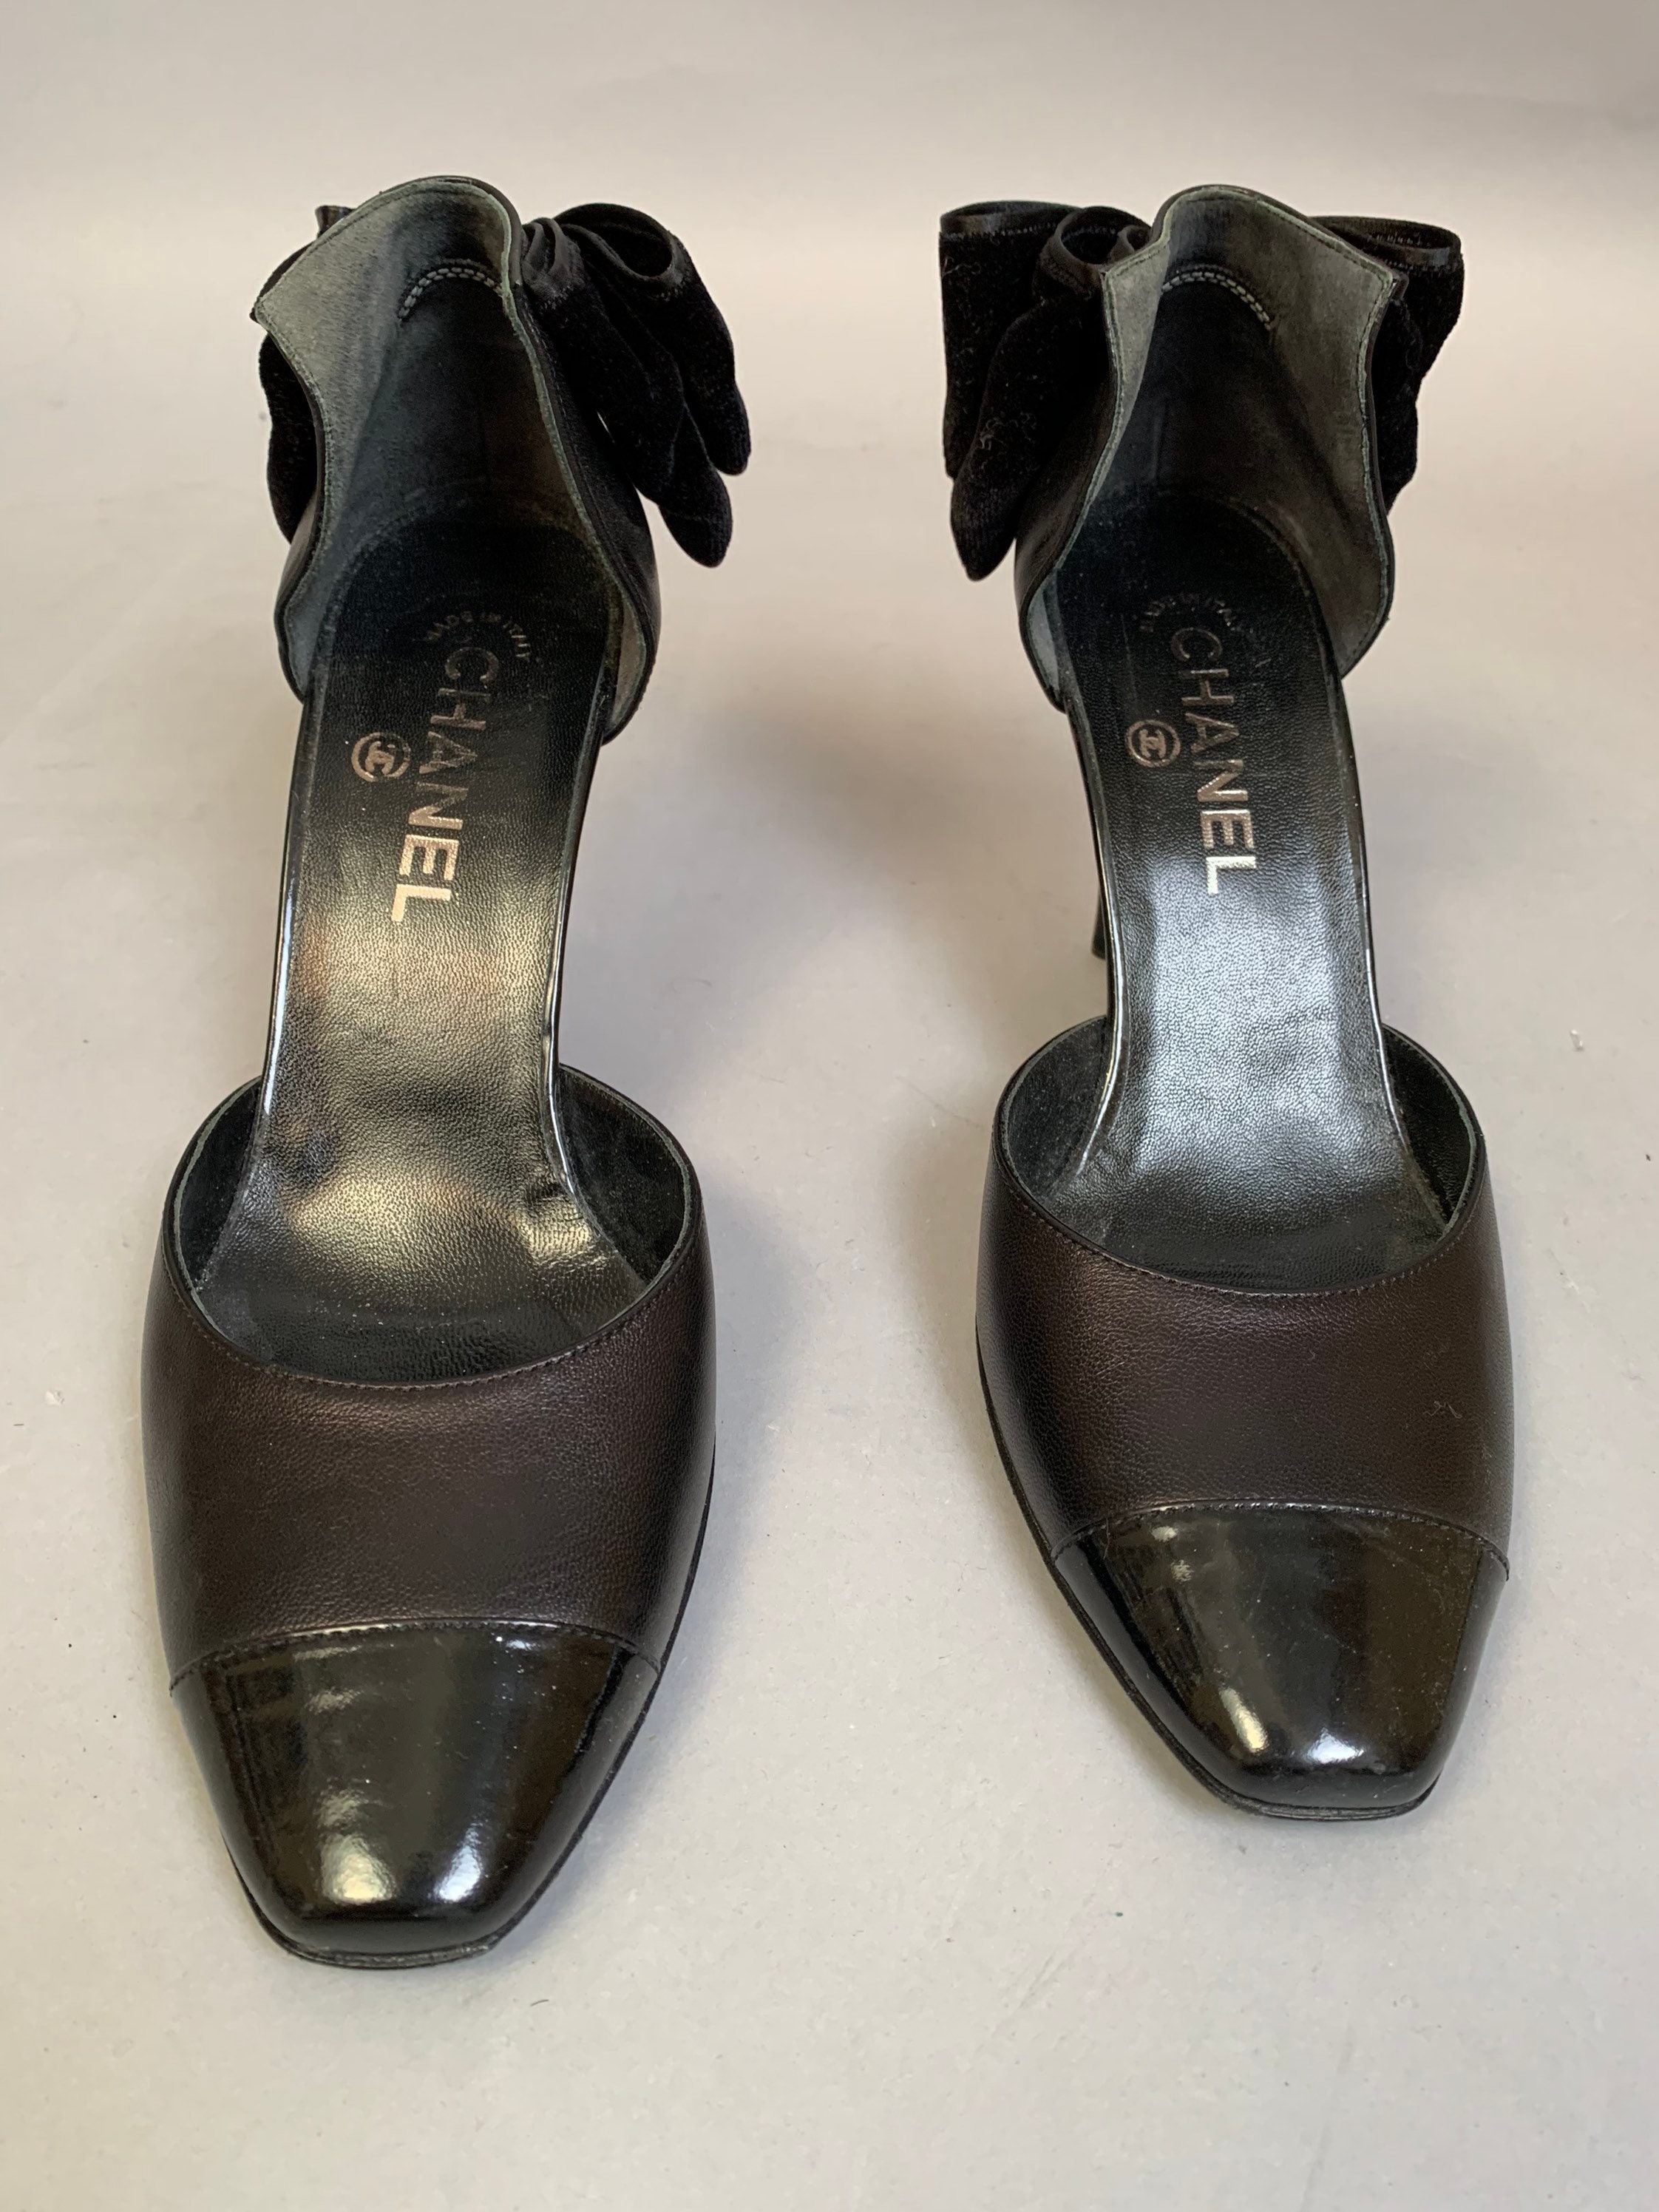 CHANEL Escarpin Shoes with Pearl Size 40 (US 9.5)